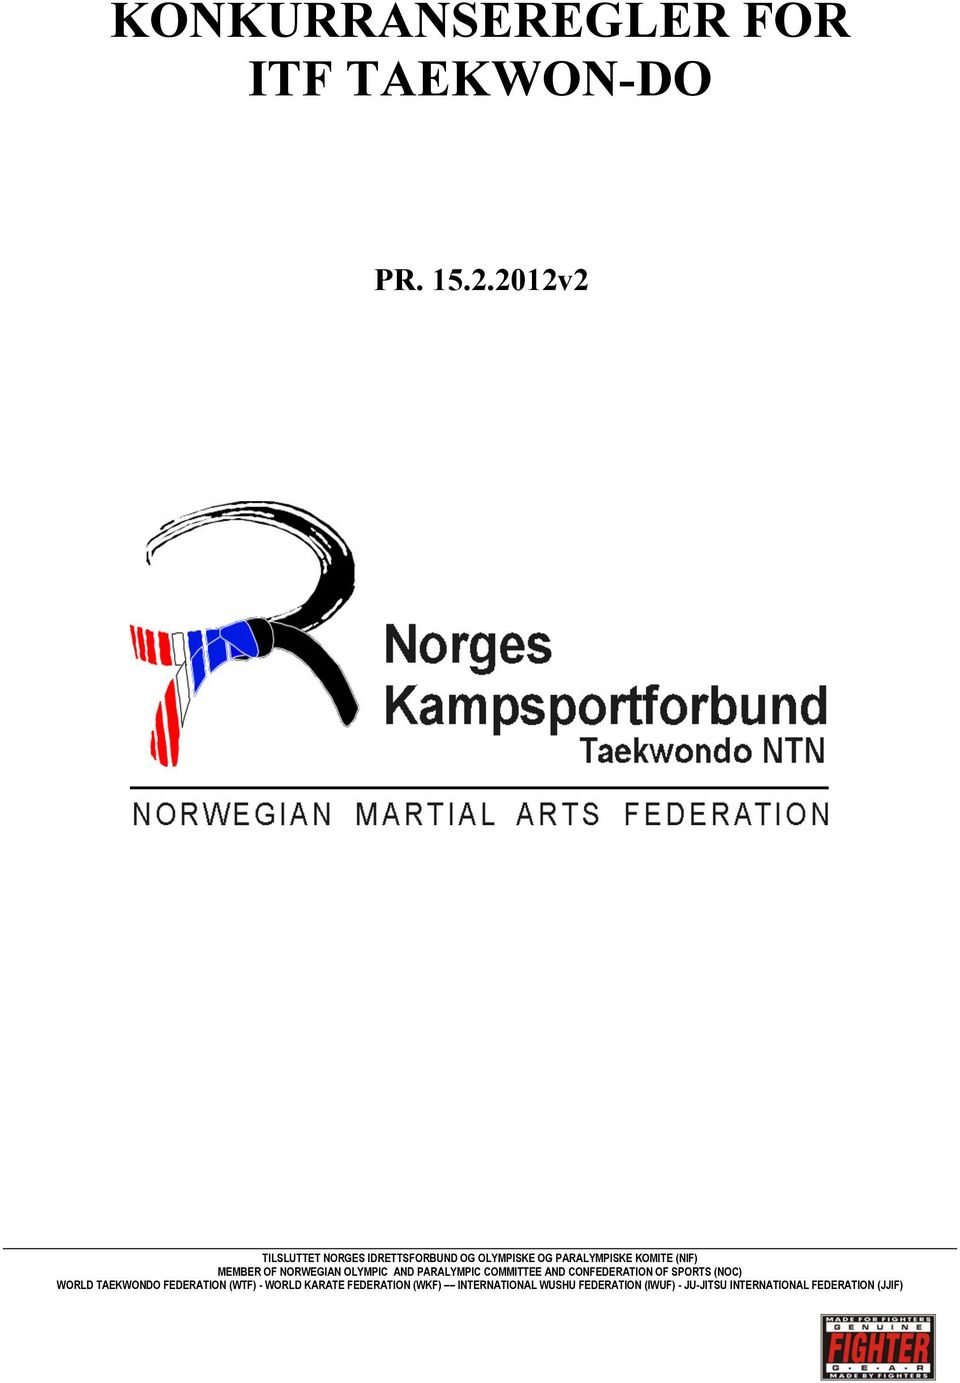 OF NORWEGIAN OLYMPIC AND PARALYMPIC COMMITTEE AND CONFEDERATION OF SPORTS (NOC) WORLD